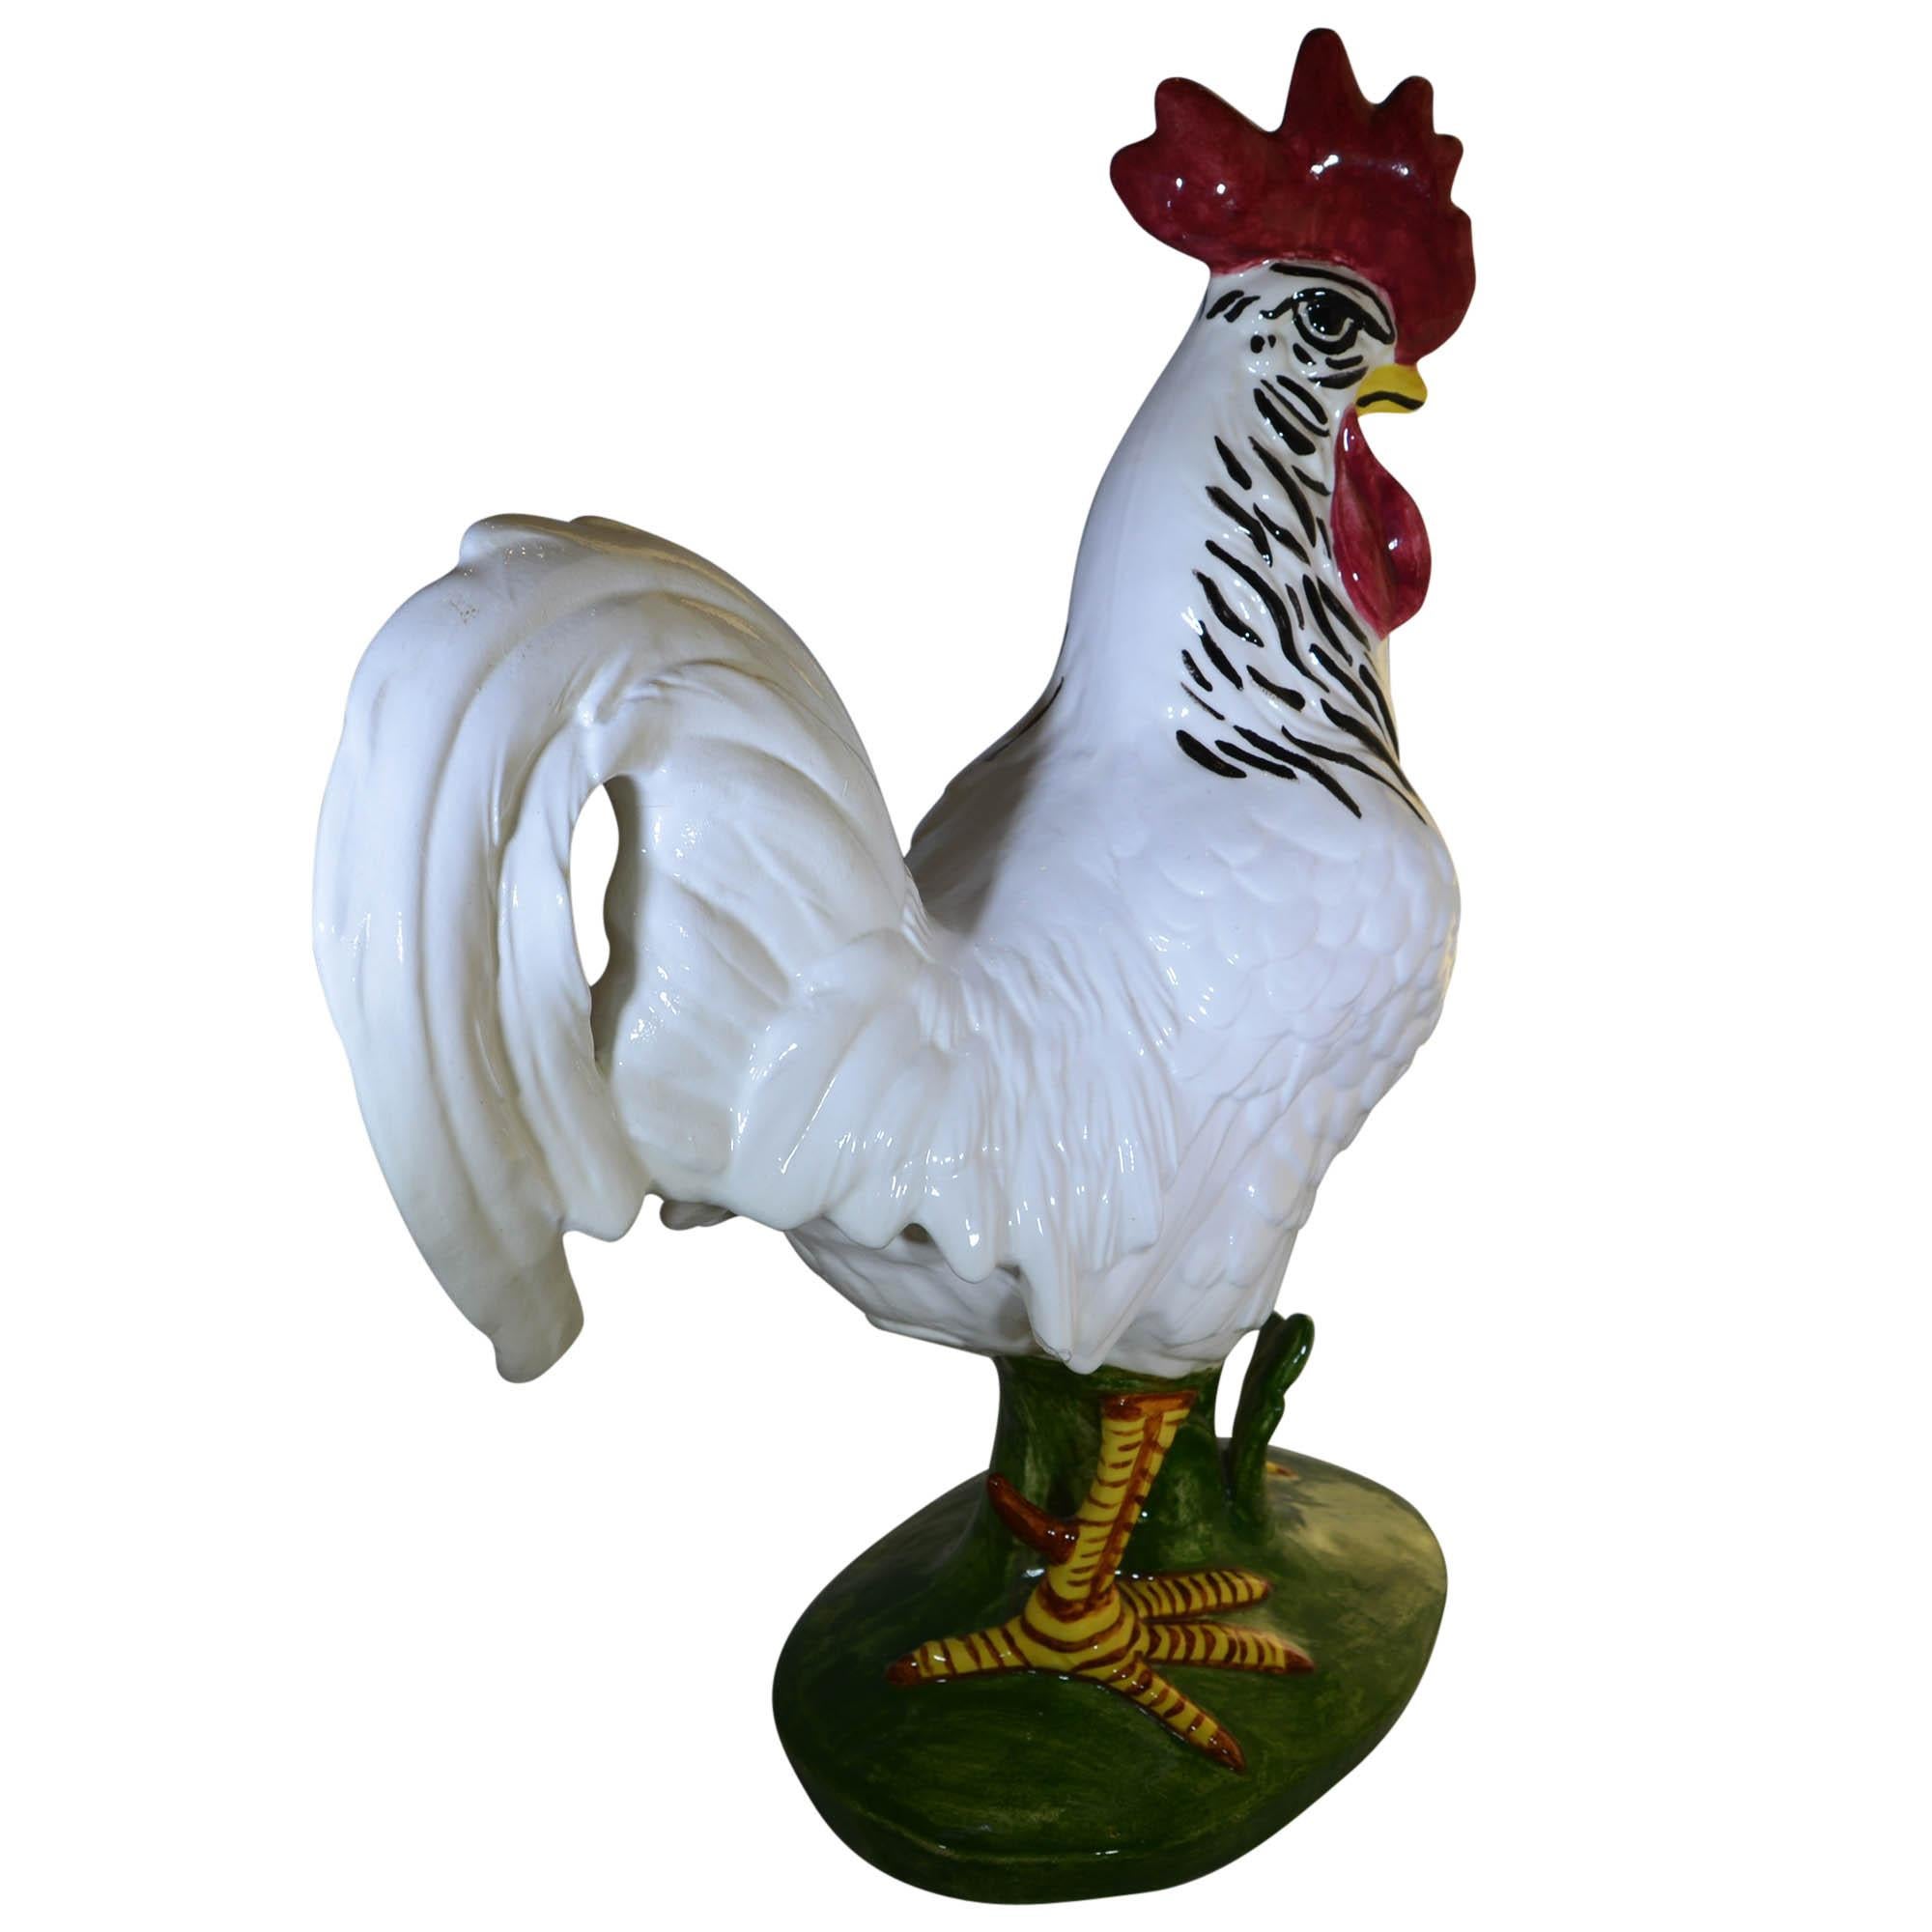 American Vintage Pennsbury Pottery Rooster Figurine White Green Base